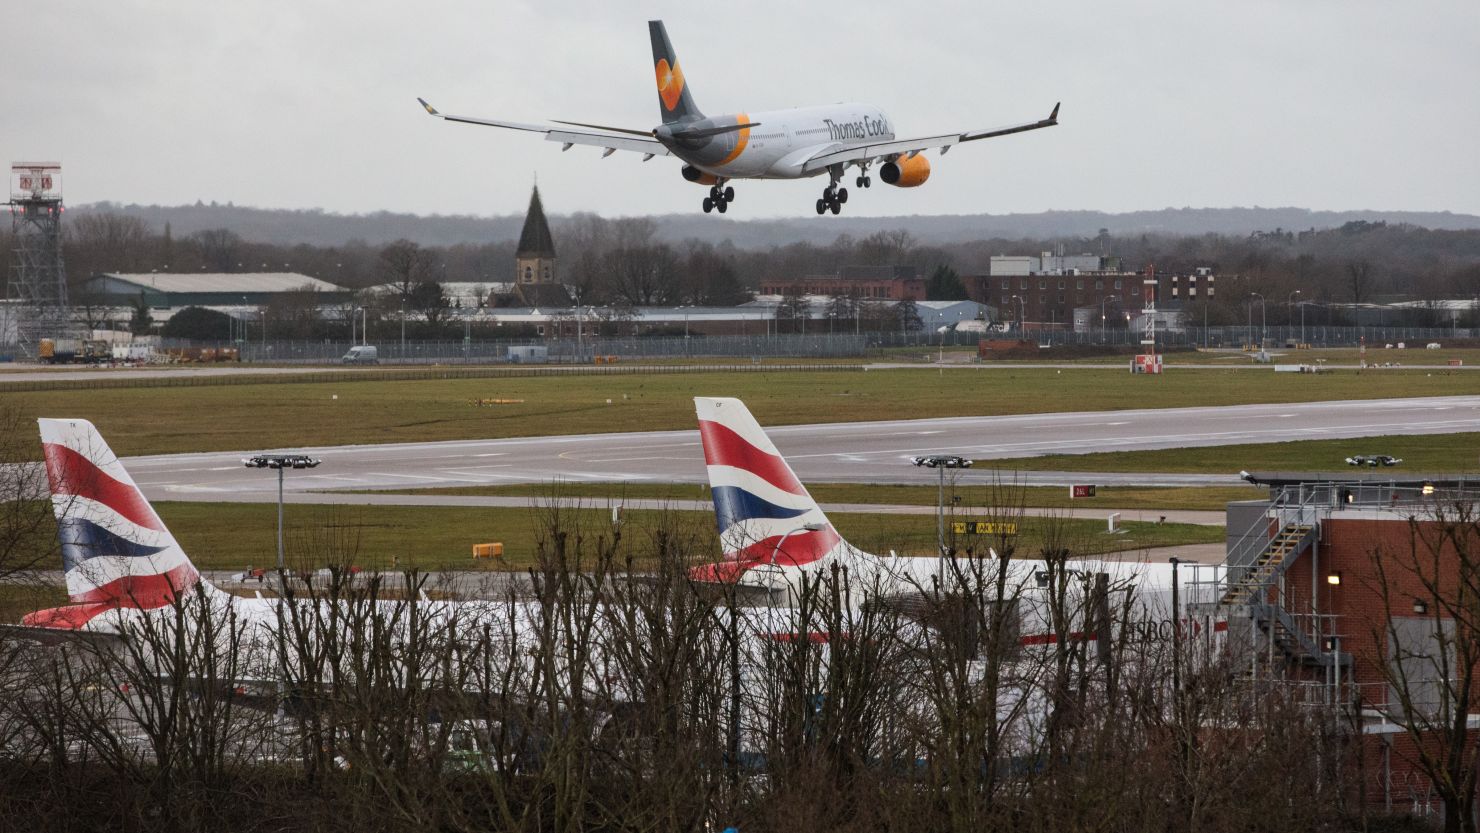 An aircraft comes in to land at Gatwick Airport on December 21, 2018.